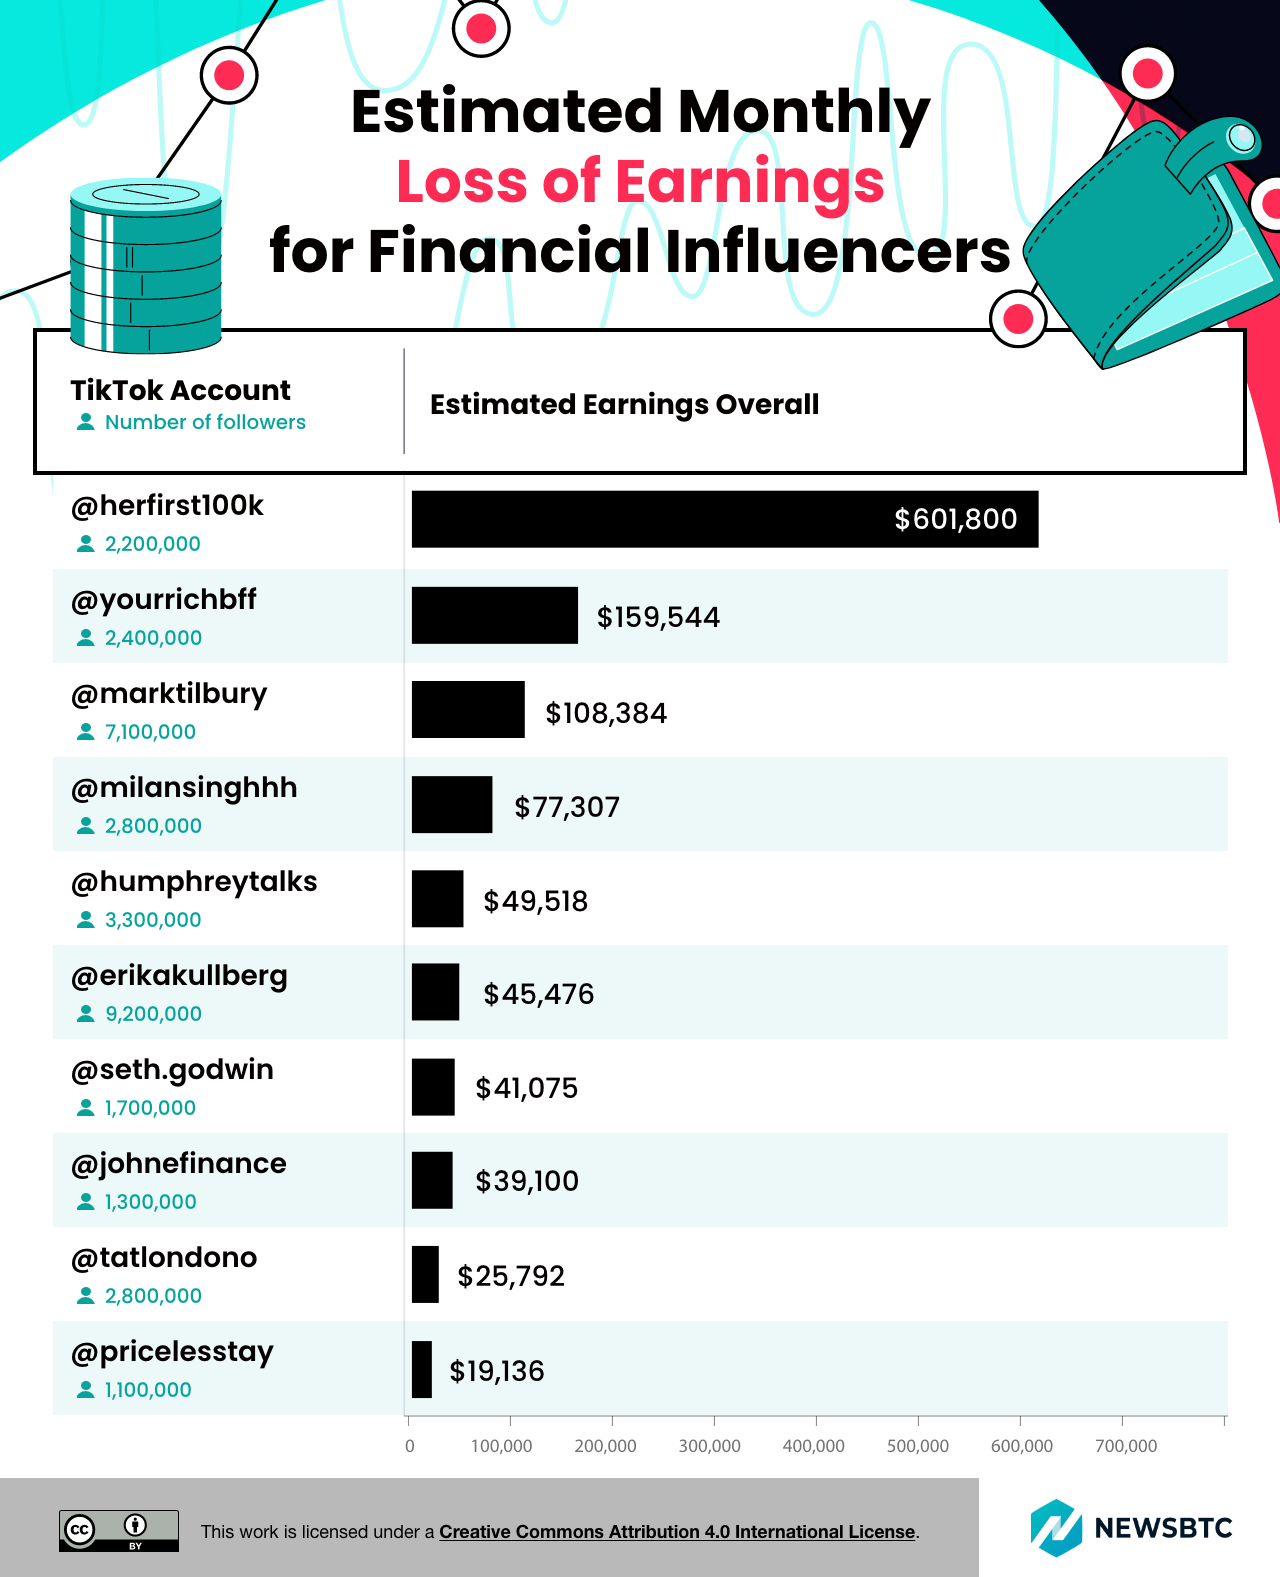 Estimated-monthly-loss-of-earnings-for-financial-influencers.png